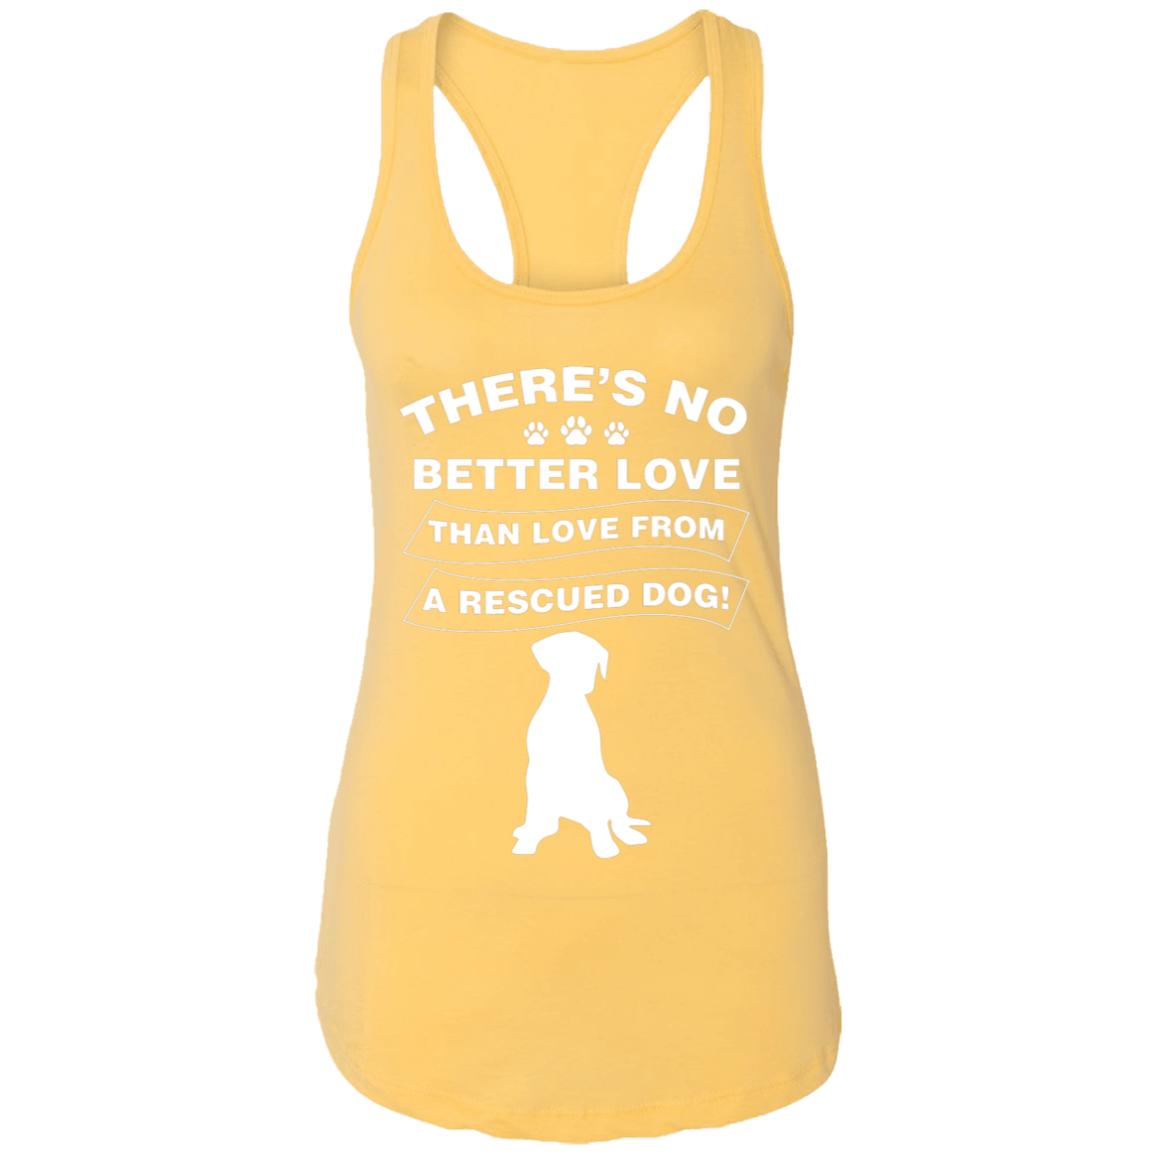 There's No Better Love - Ladies Racer Back Tank.